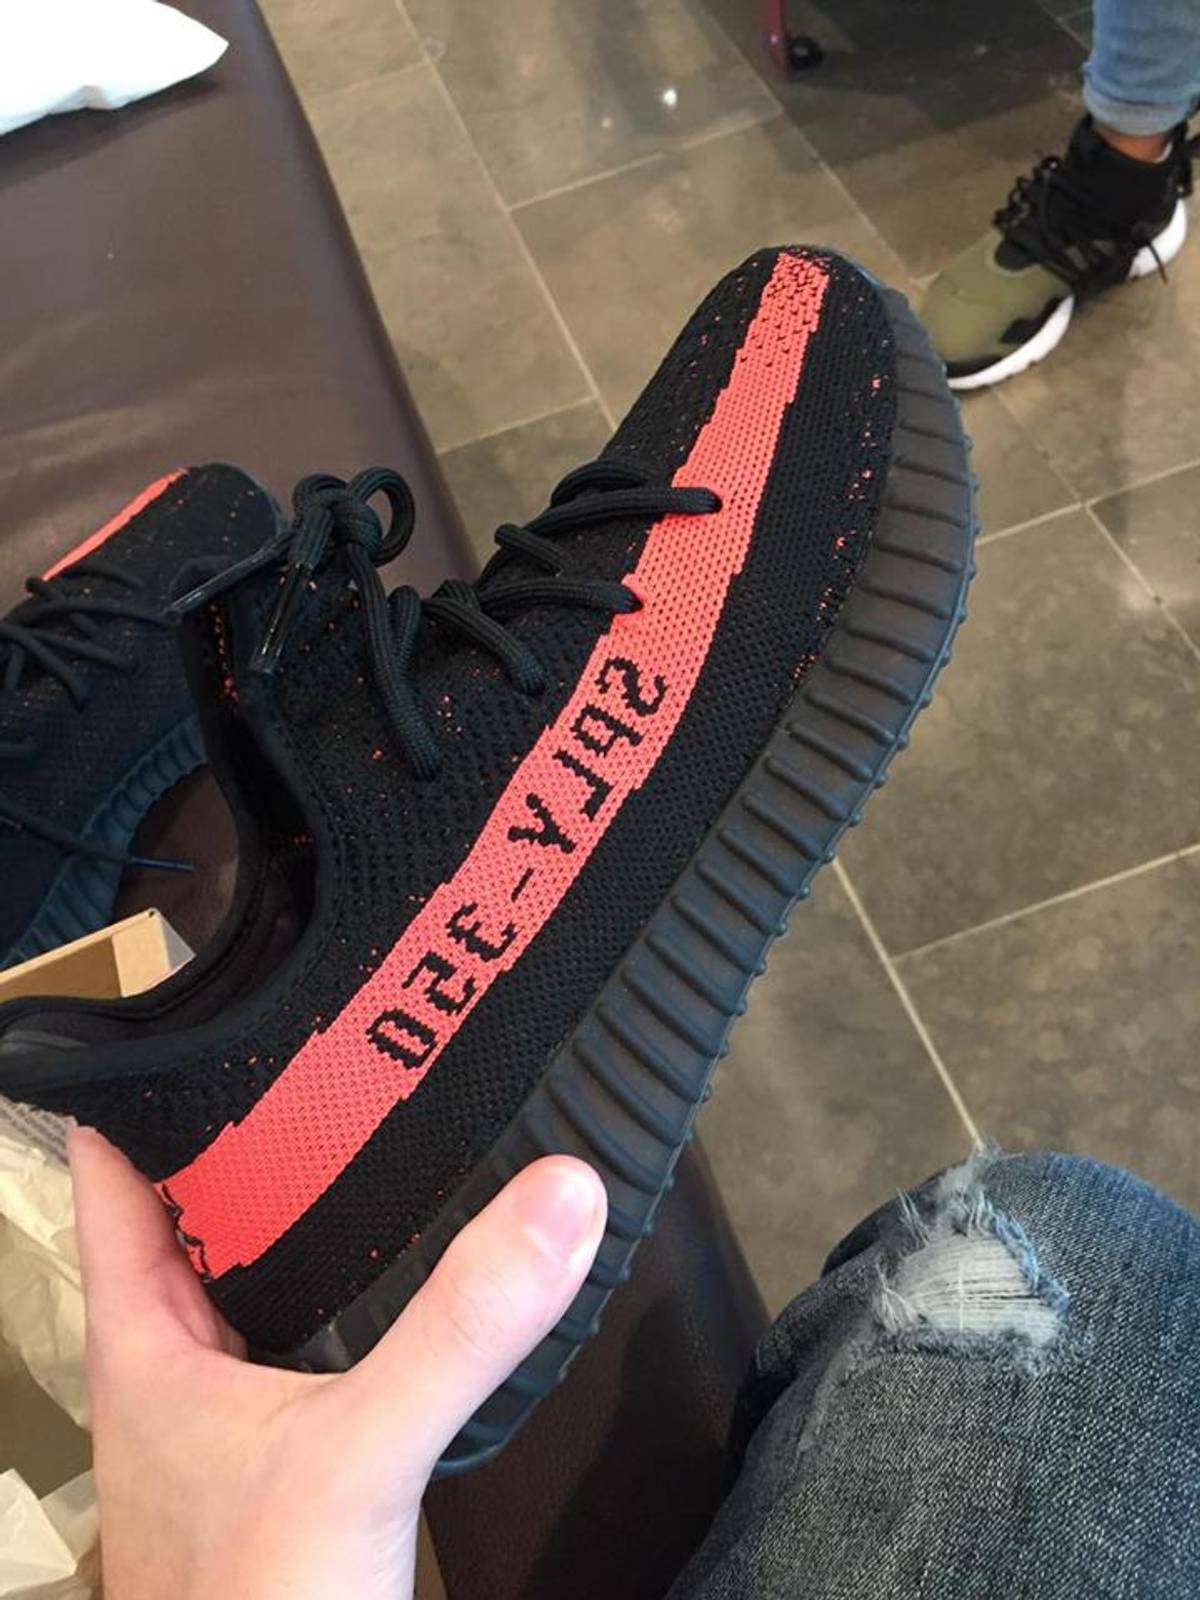 Yeezy 350 Boost V2 SPLY 350 BRED Black / Red from artemis outlet